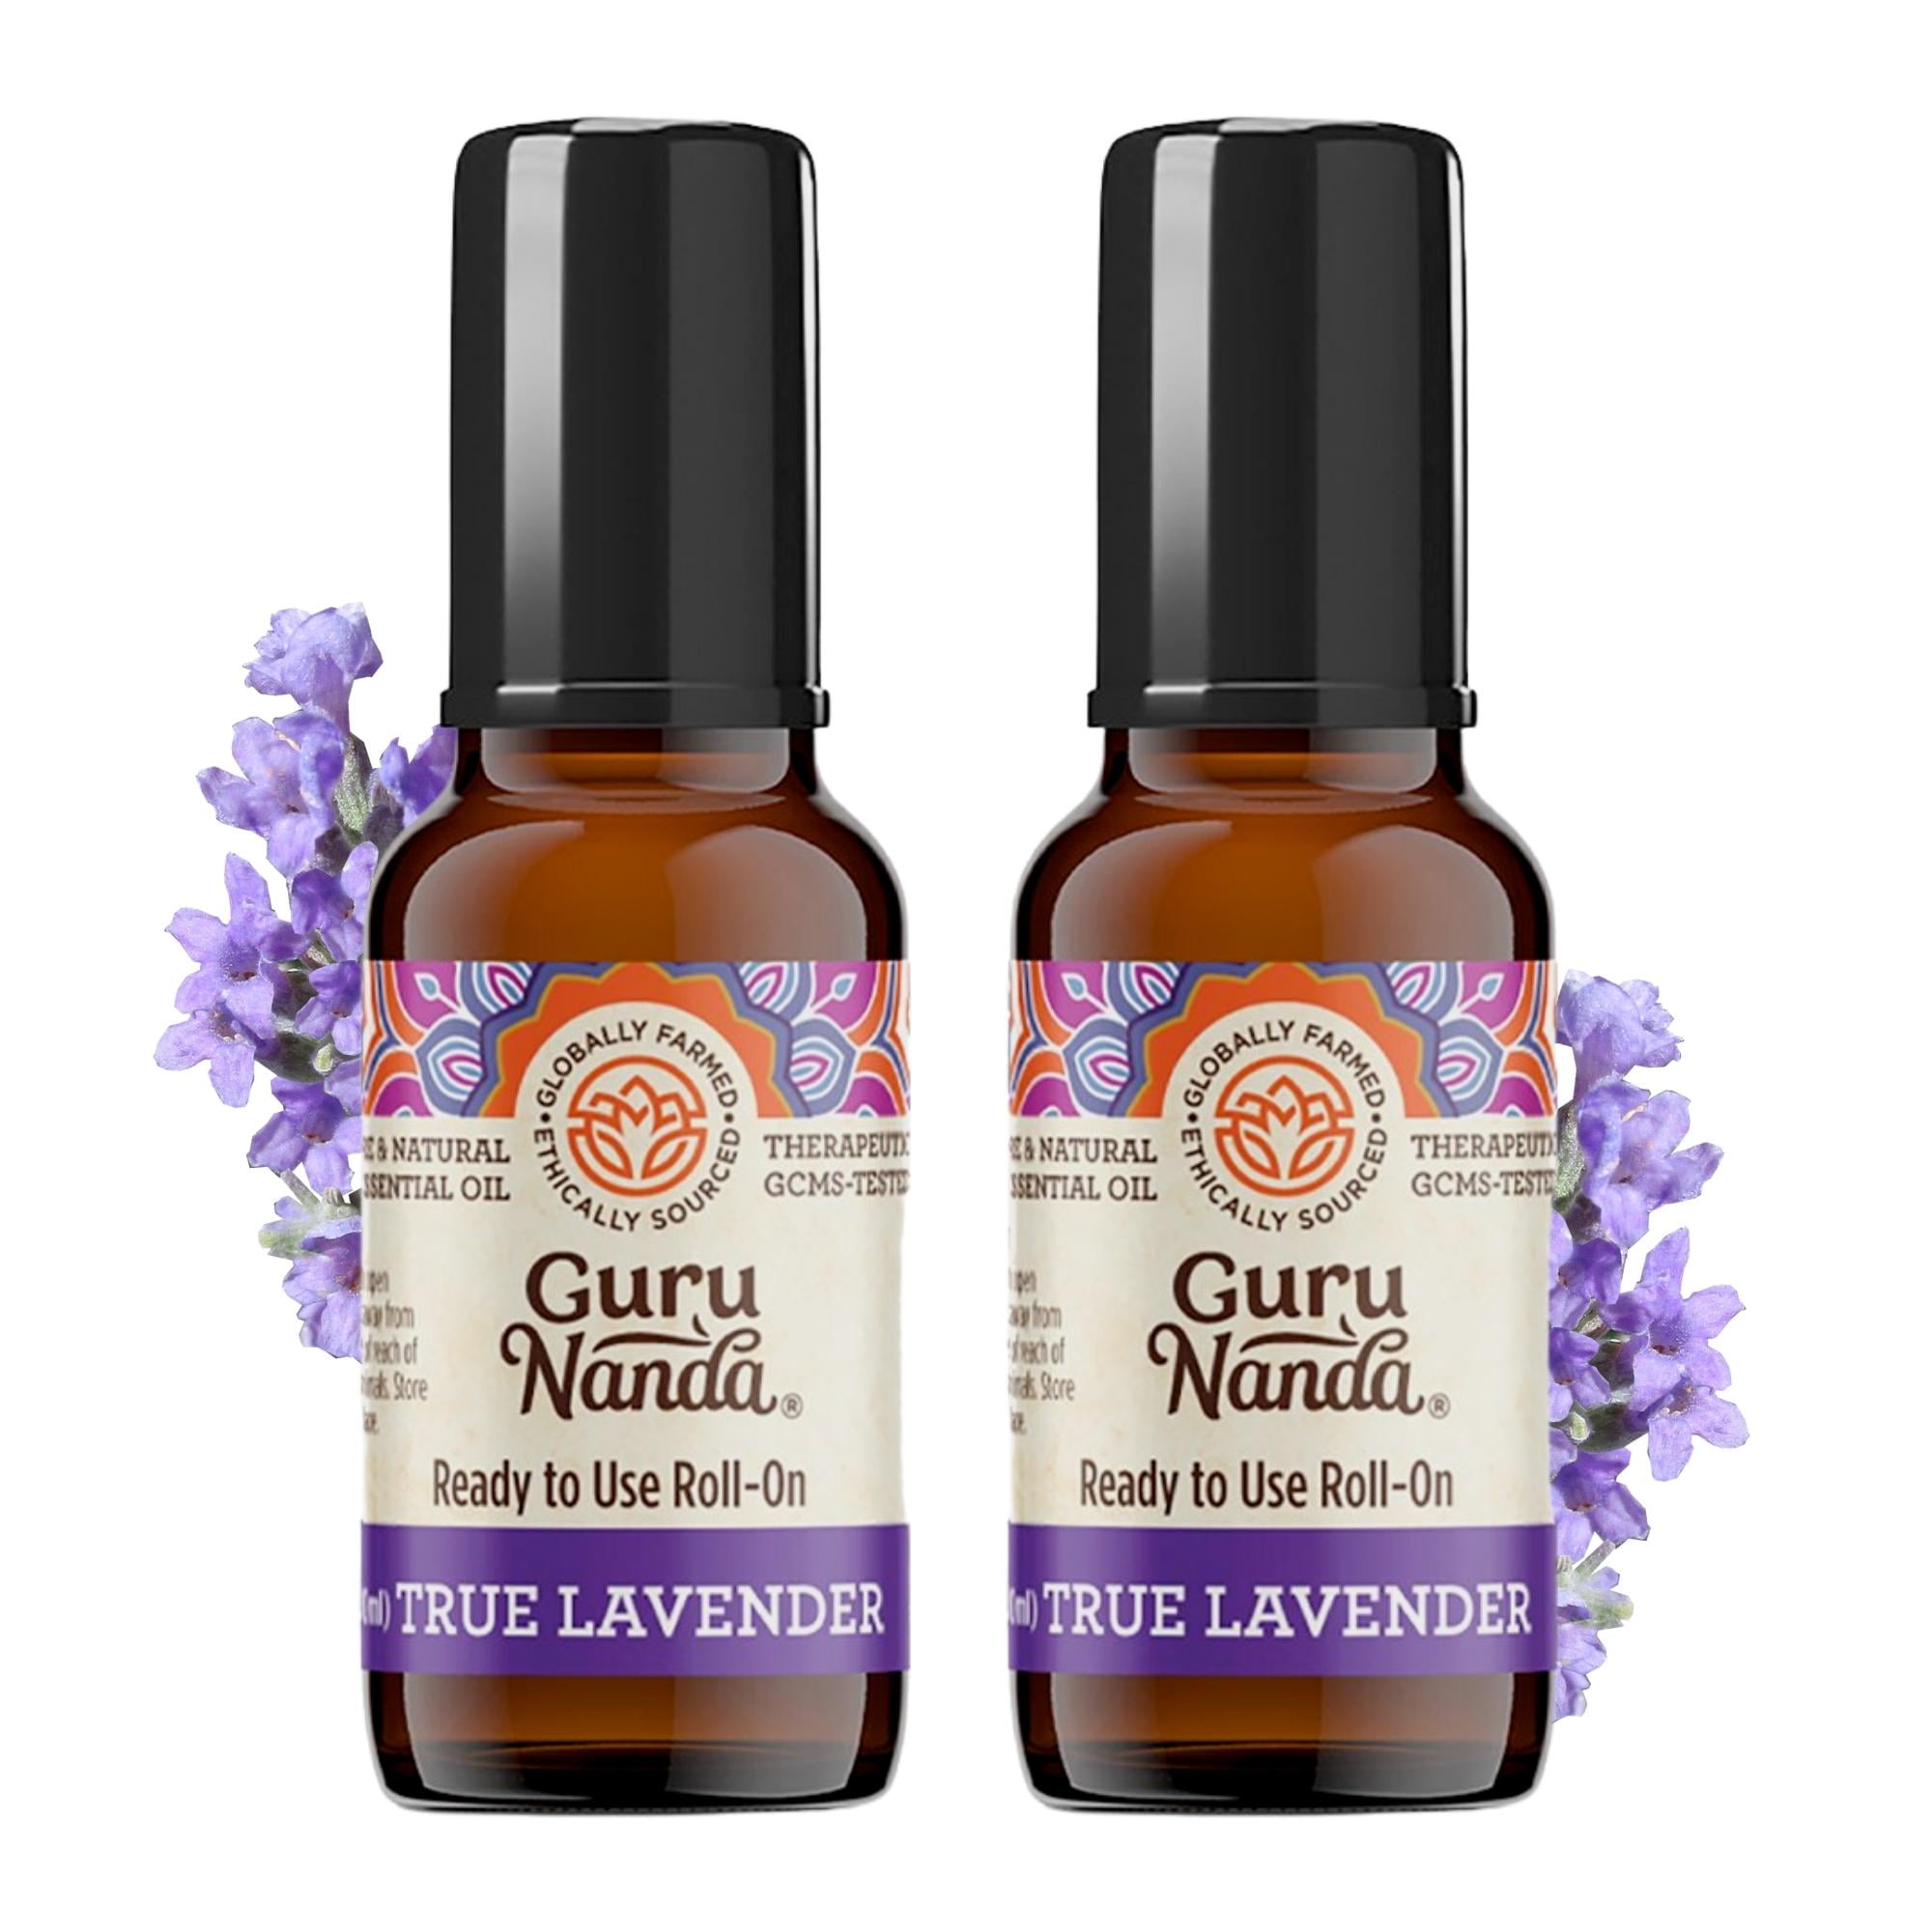 GuruNanda 100% Pure Lavender Topical Essential Oil Roll-on Promotes Sleep,  Calming & Relaxation -2Pk 